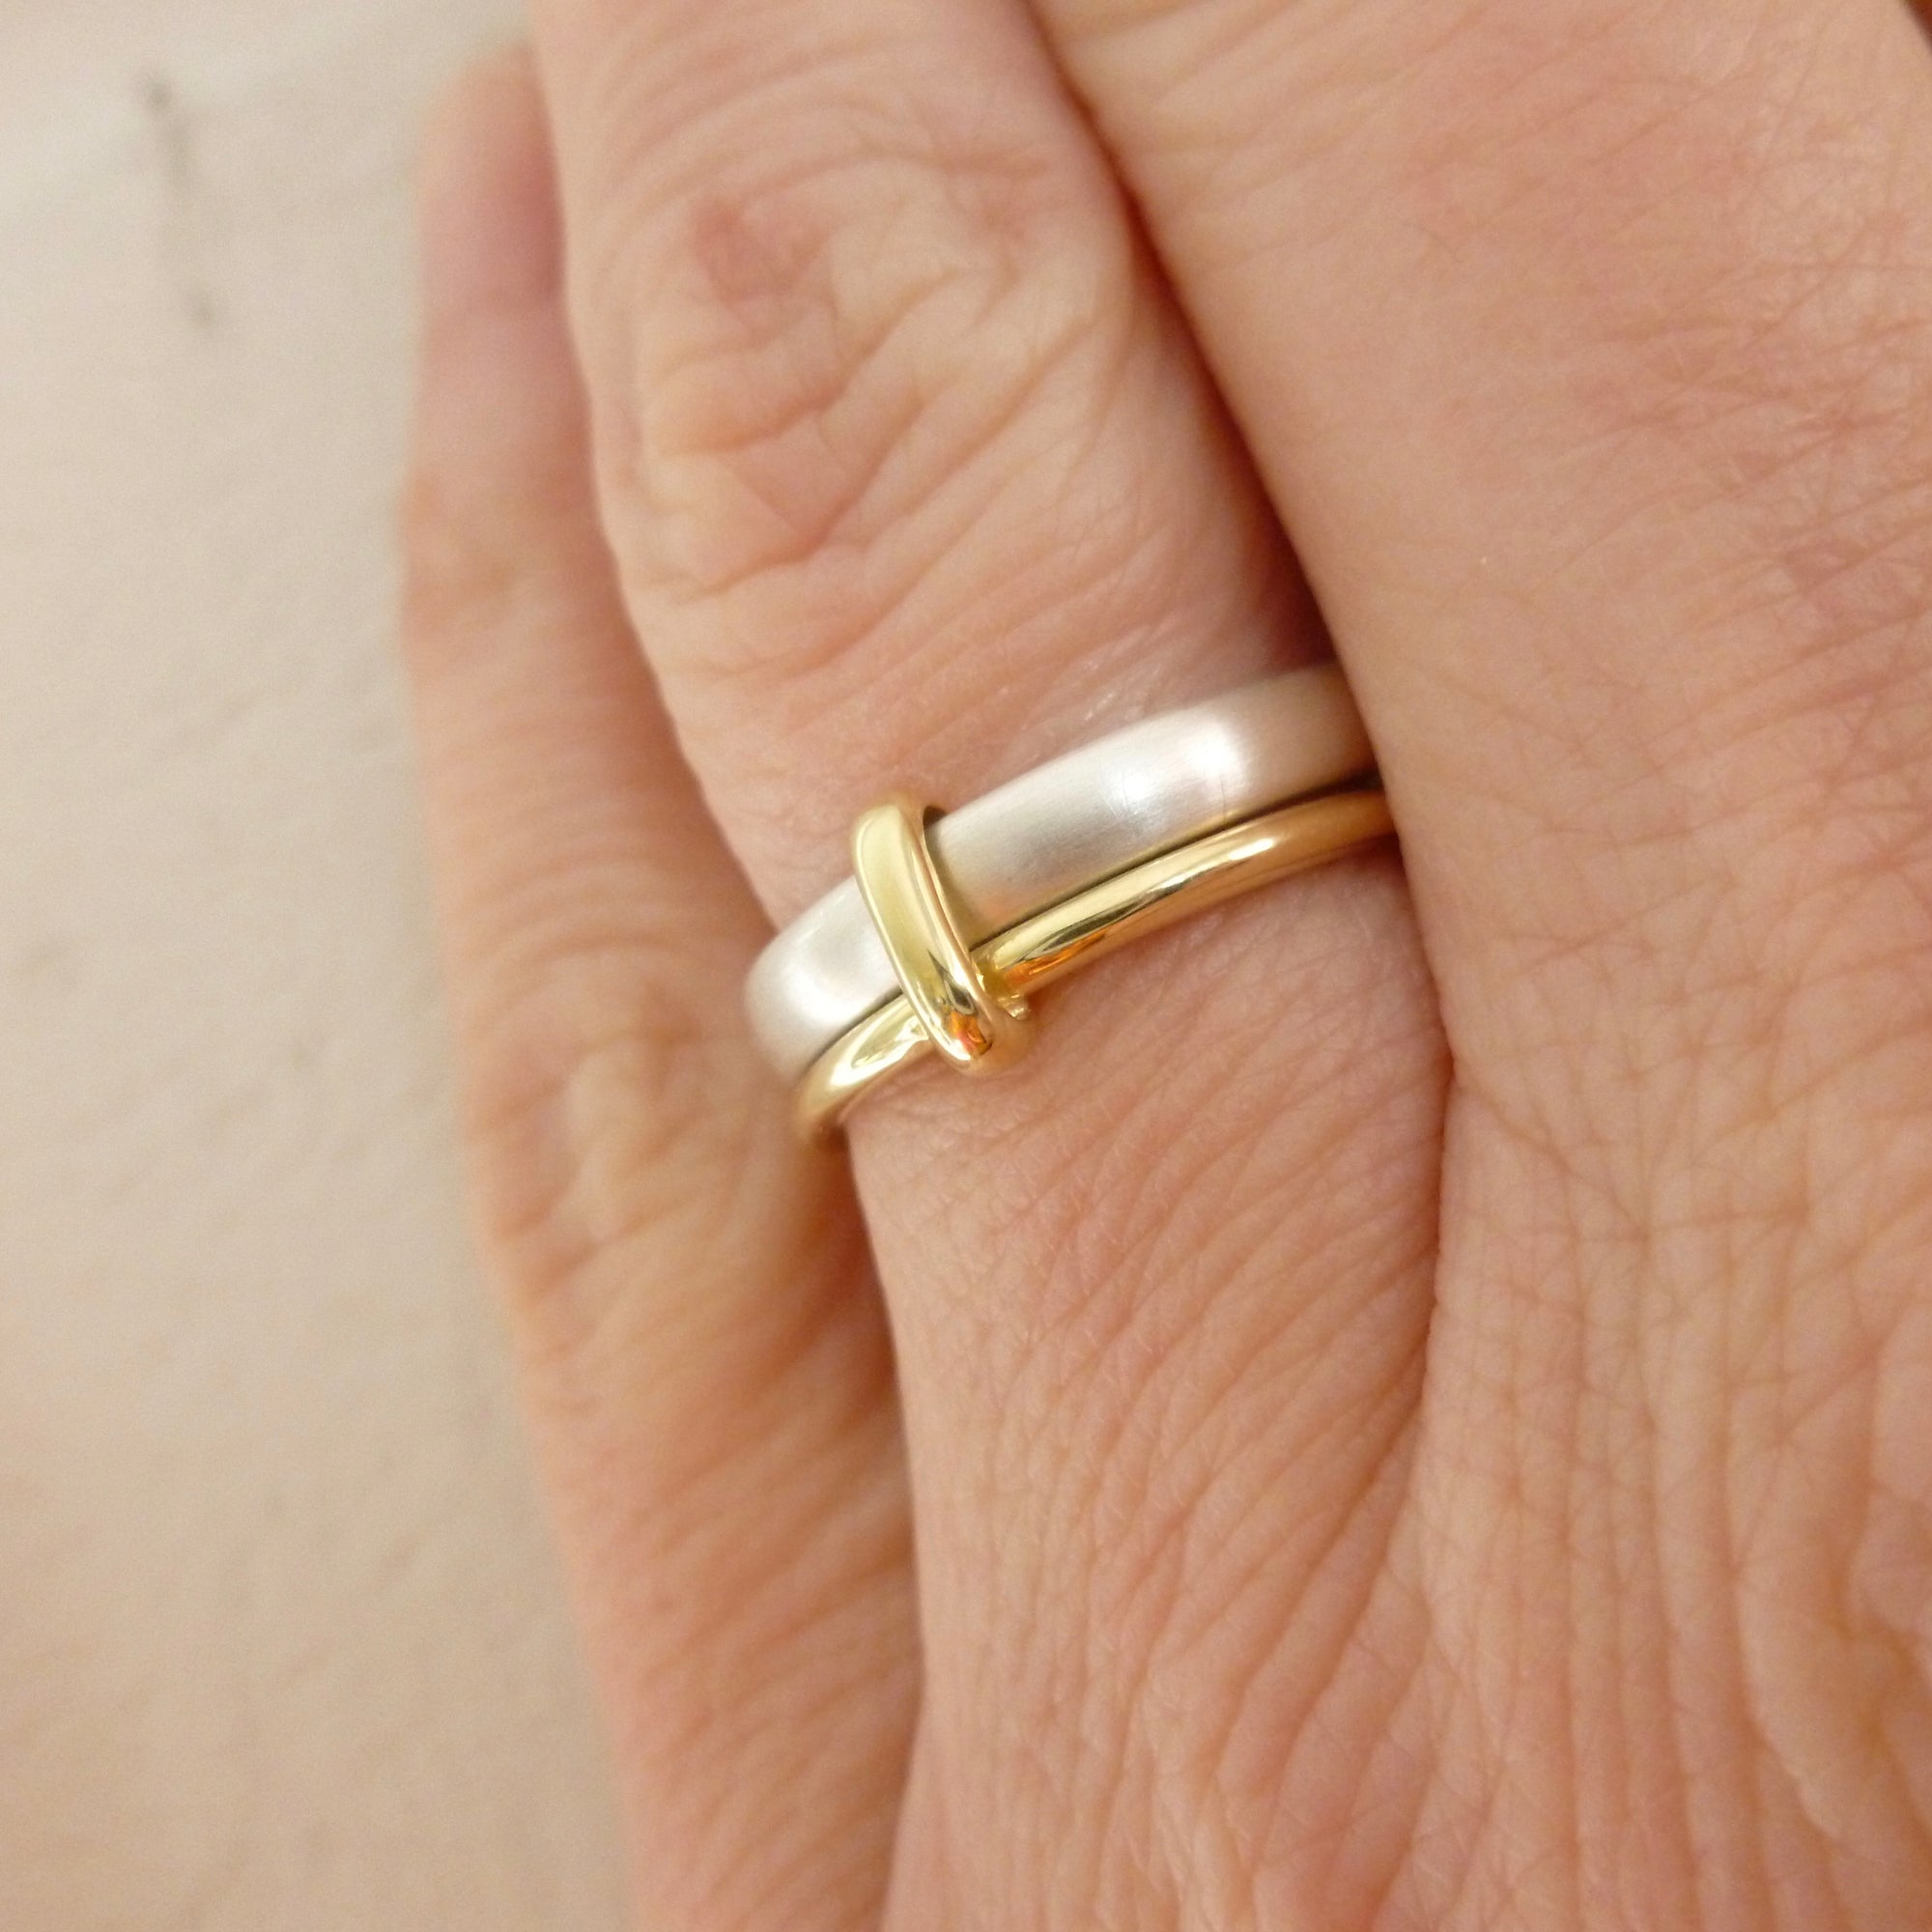 Simple and modern handmade two band stacking ring in silver and gold, an alternative wedding or dress ring